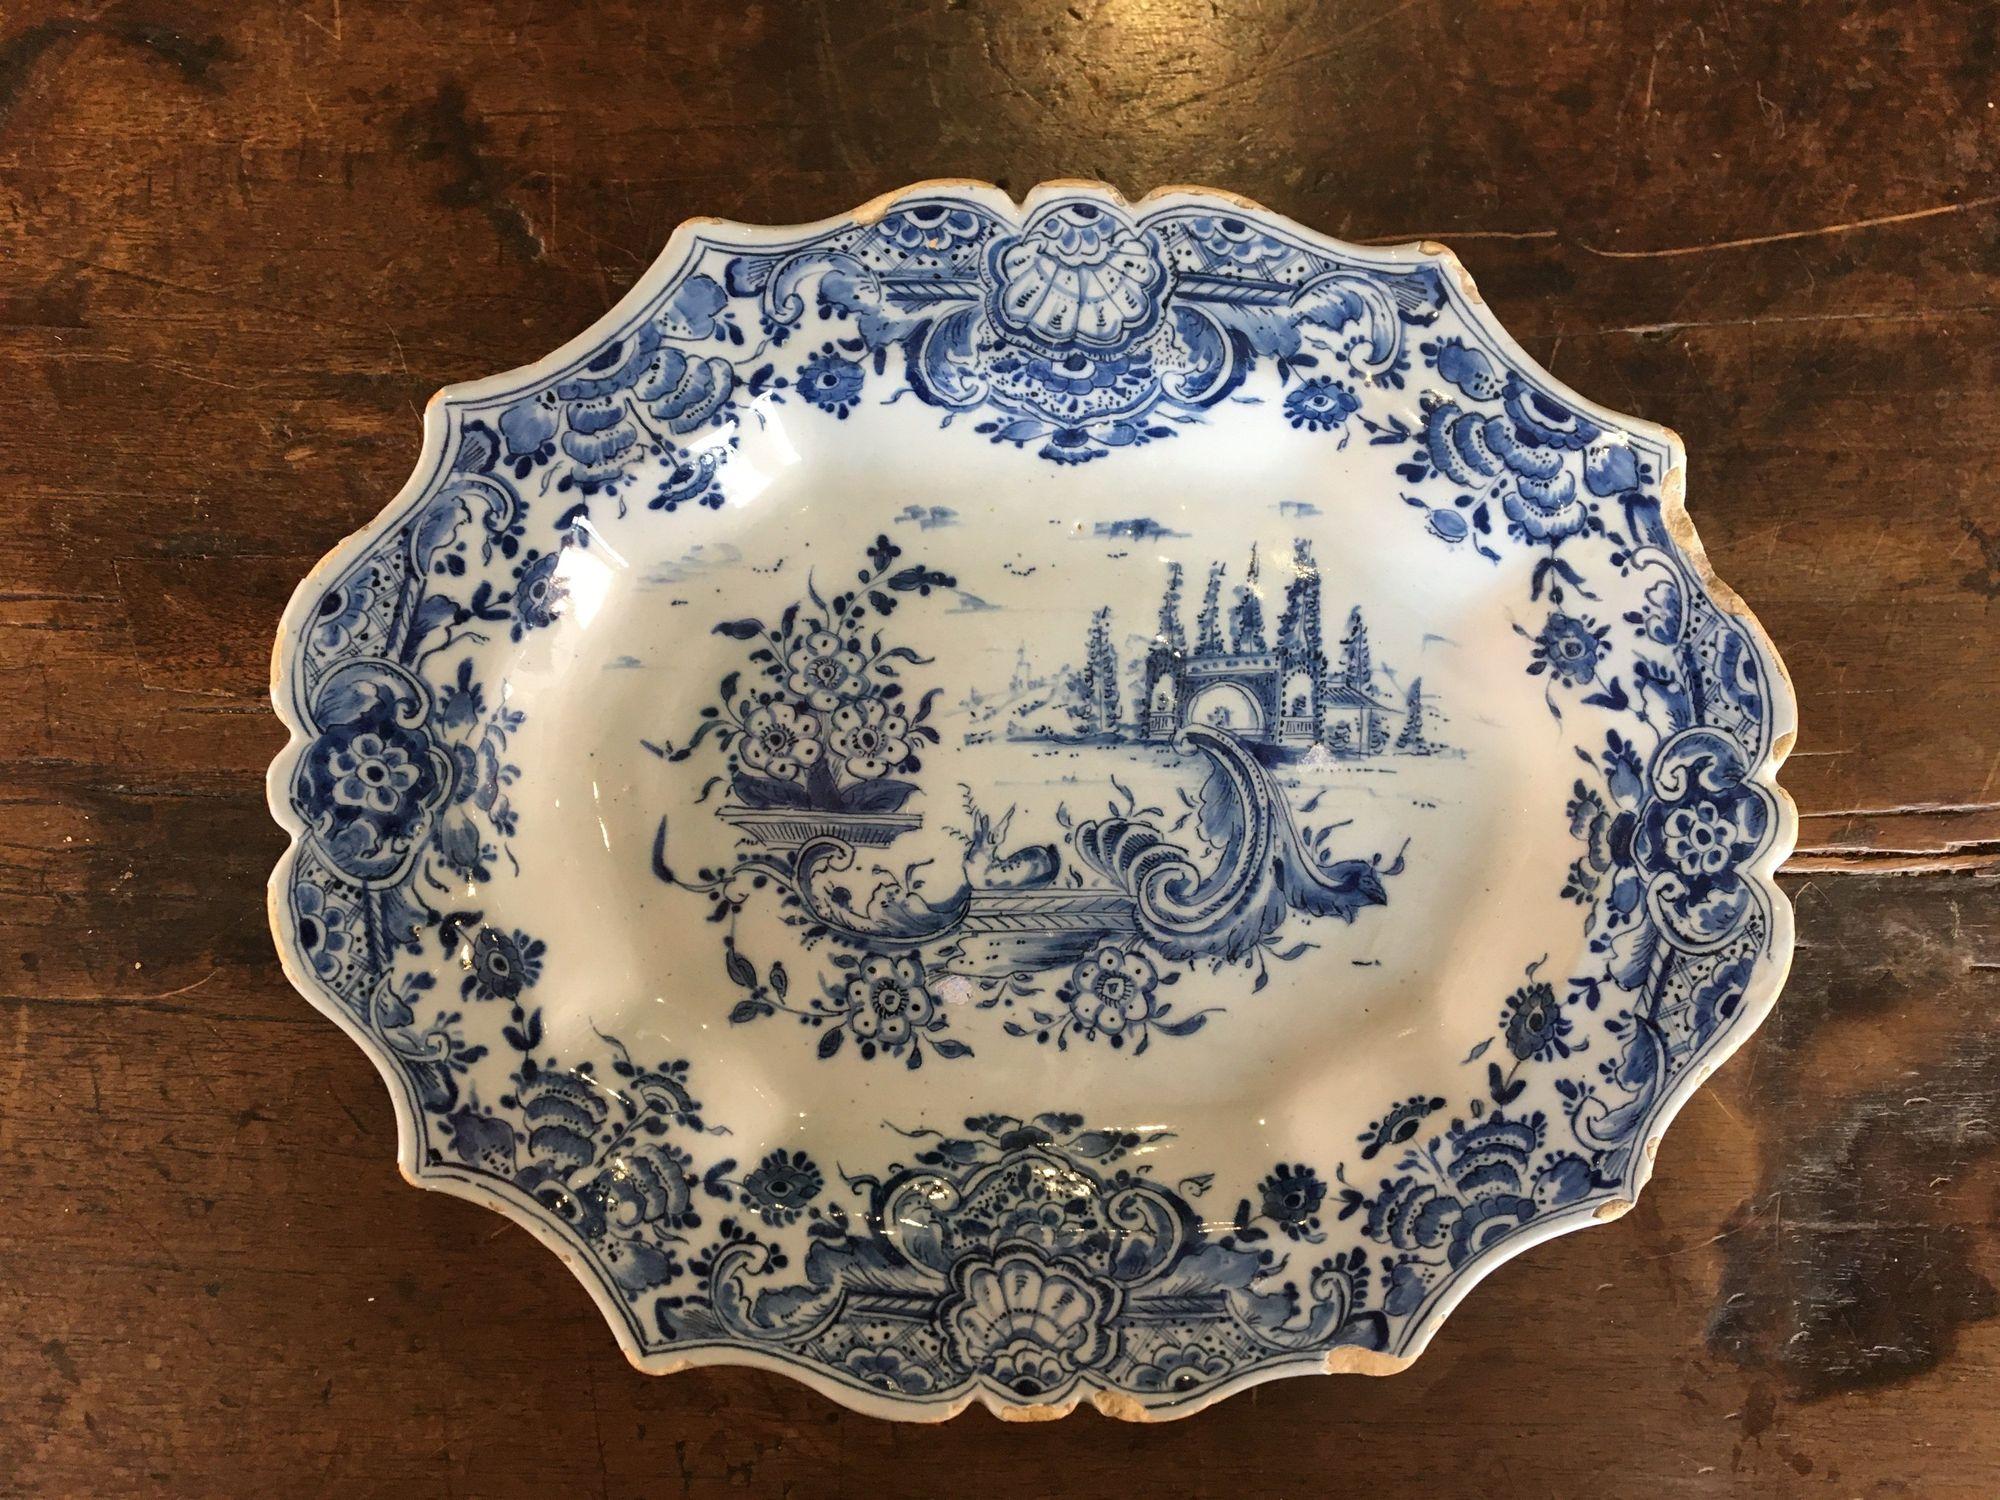 Small Dutch delft oval tray, 18th century, with scalloped rim, floral, landscape and shell decoration, base marked 'IVDH' for Jan van der Hagen of the 'Het Jonge Moriaanshooft' workshop. This delicately formed platter has particularly refined detail